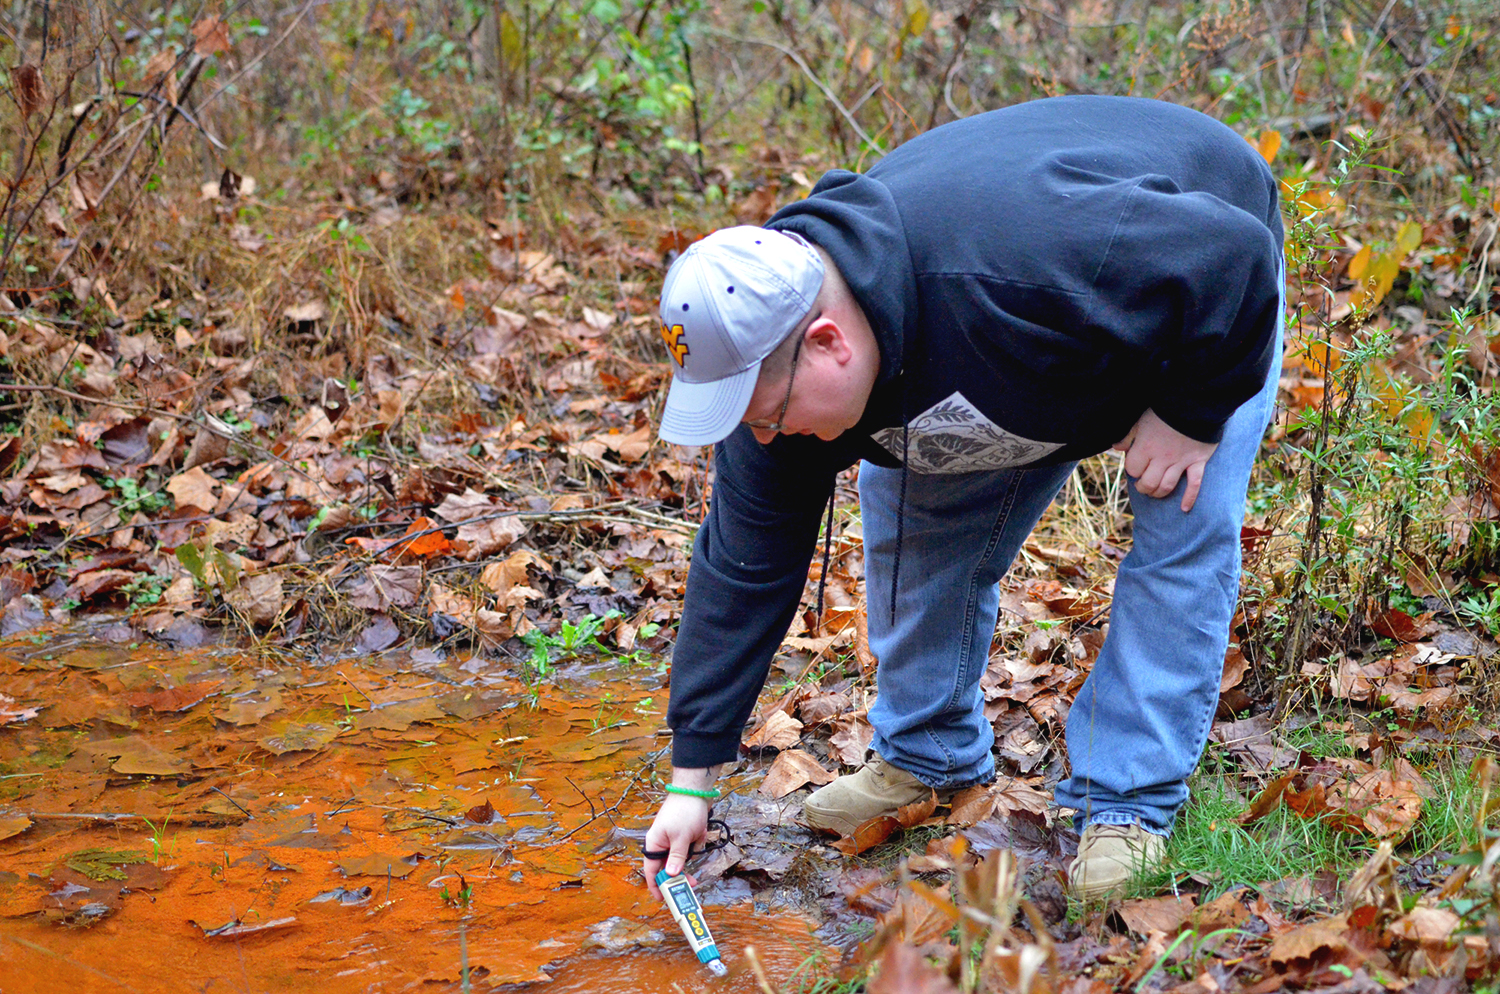 Dustin White of the Ohio Valley Environmental Coalition tests the quality of water in a stream that’s tainted orange from acid mine drainage in southern West Virginia.